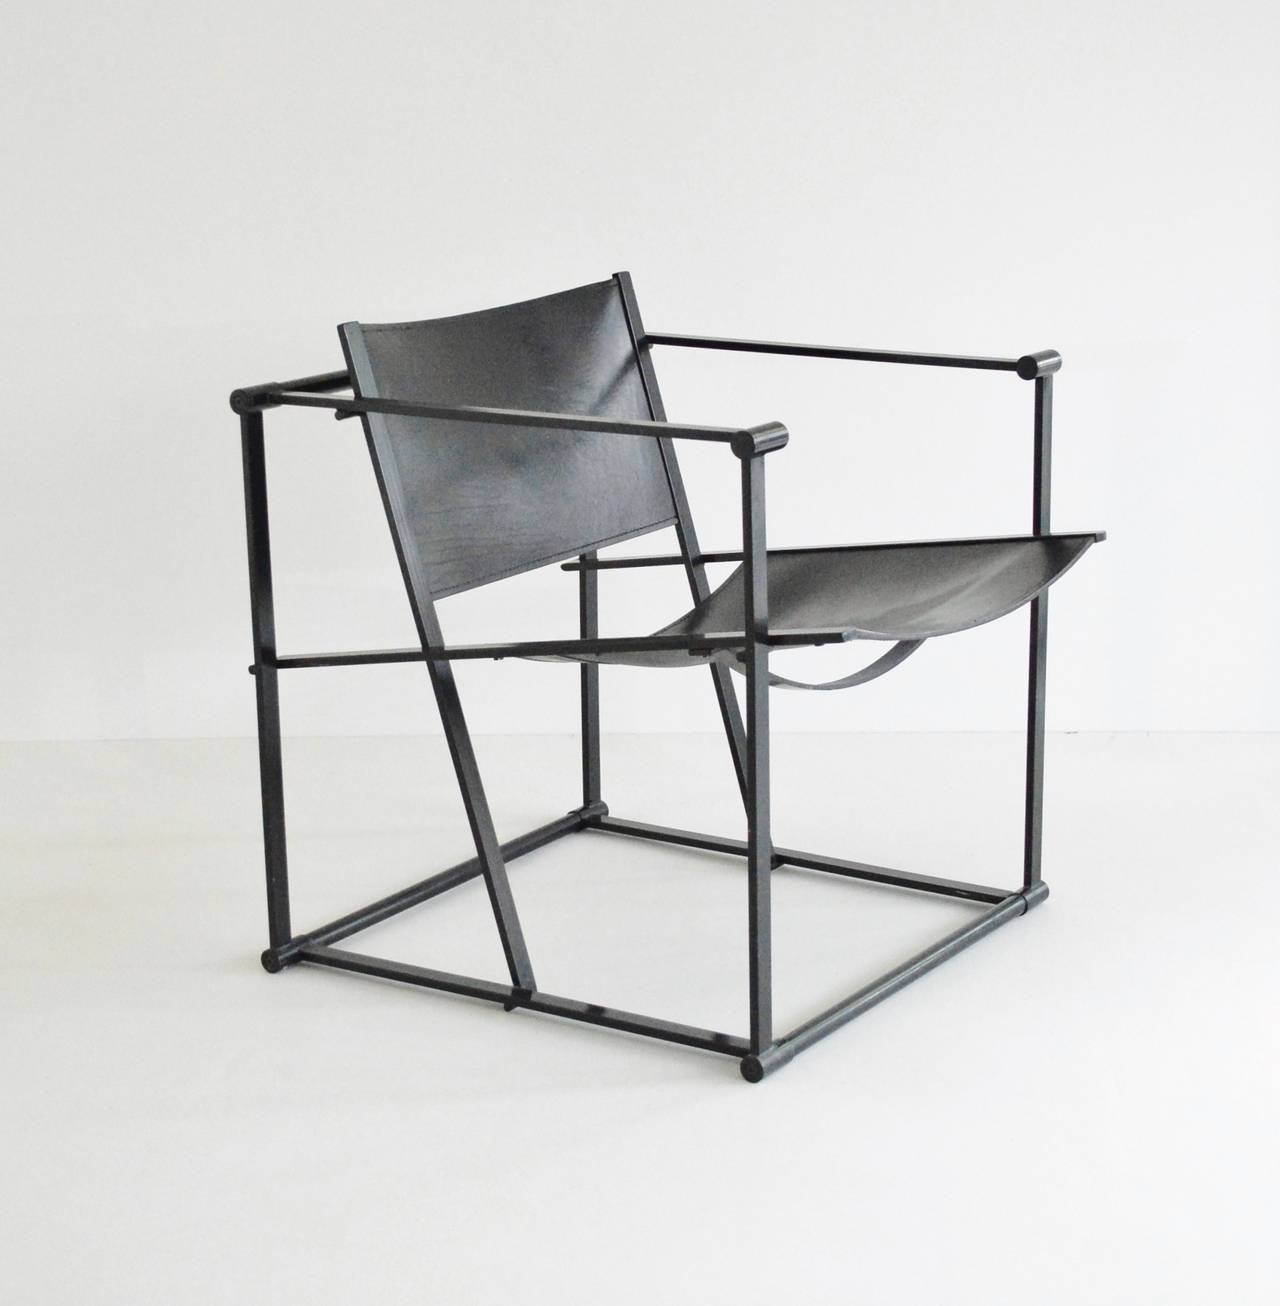 A geometric chair constructed from folded black steel with slung black leather seating. Following in the tradition of the De Stijl movement the FM60 / FM61 / FM62 model cube chairs were inspired by the designs of Gerrit Rietveld. The Cube chair was